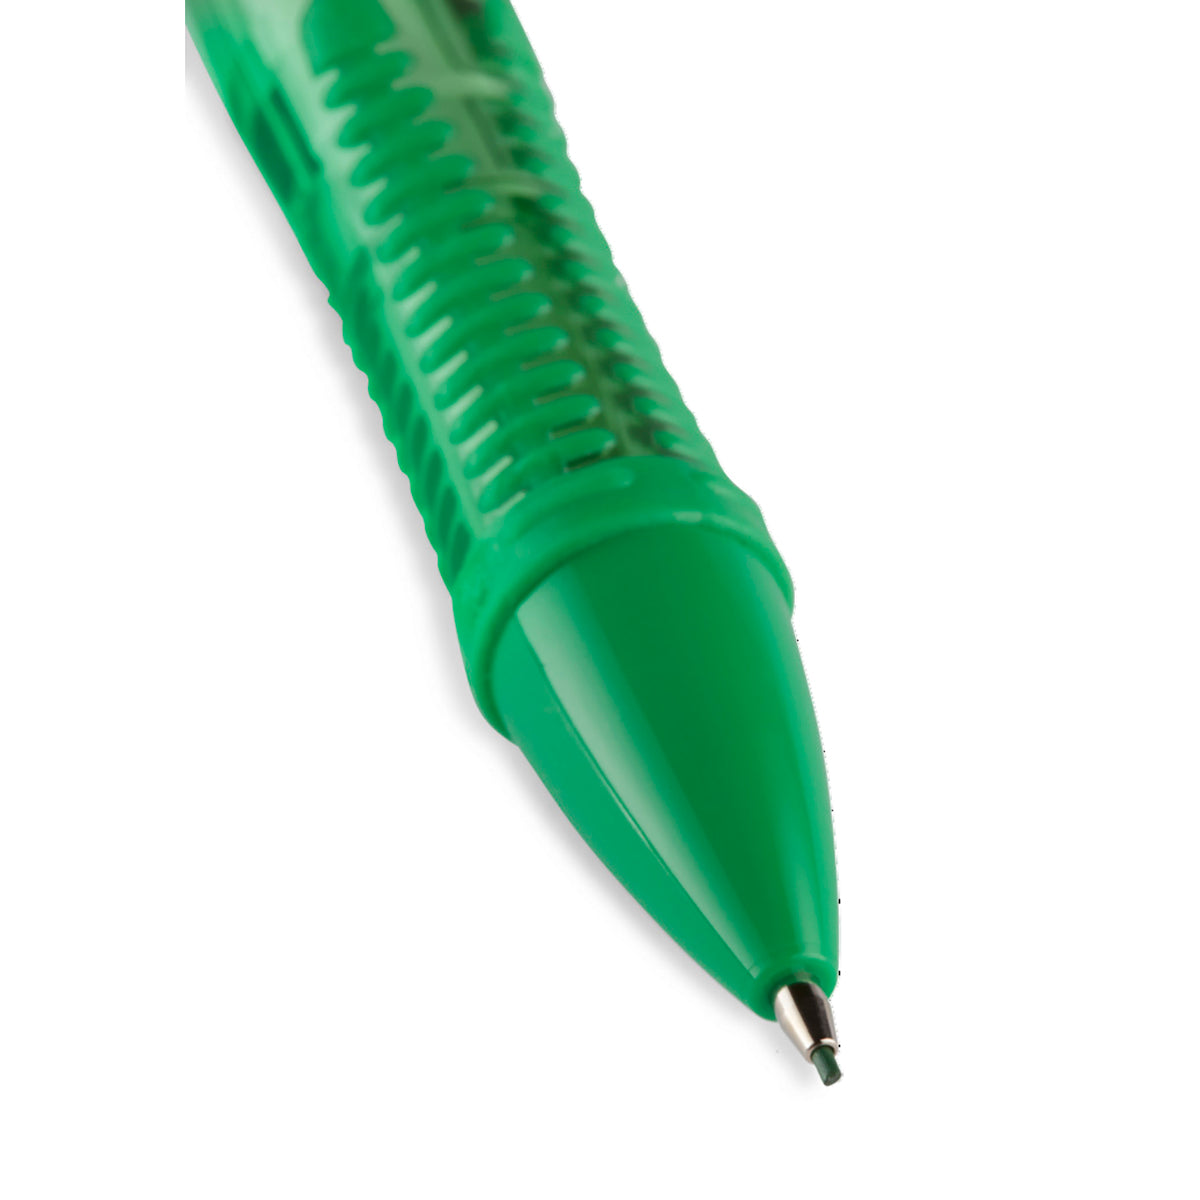 Papermate Clearpoint Green Lead Pencil 0.7mm (Green Lead)  Paper Mate Pencil